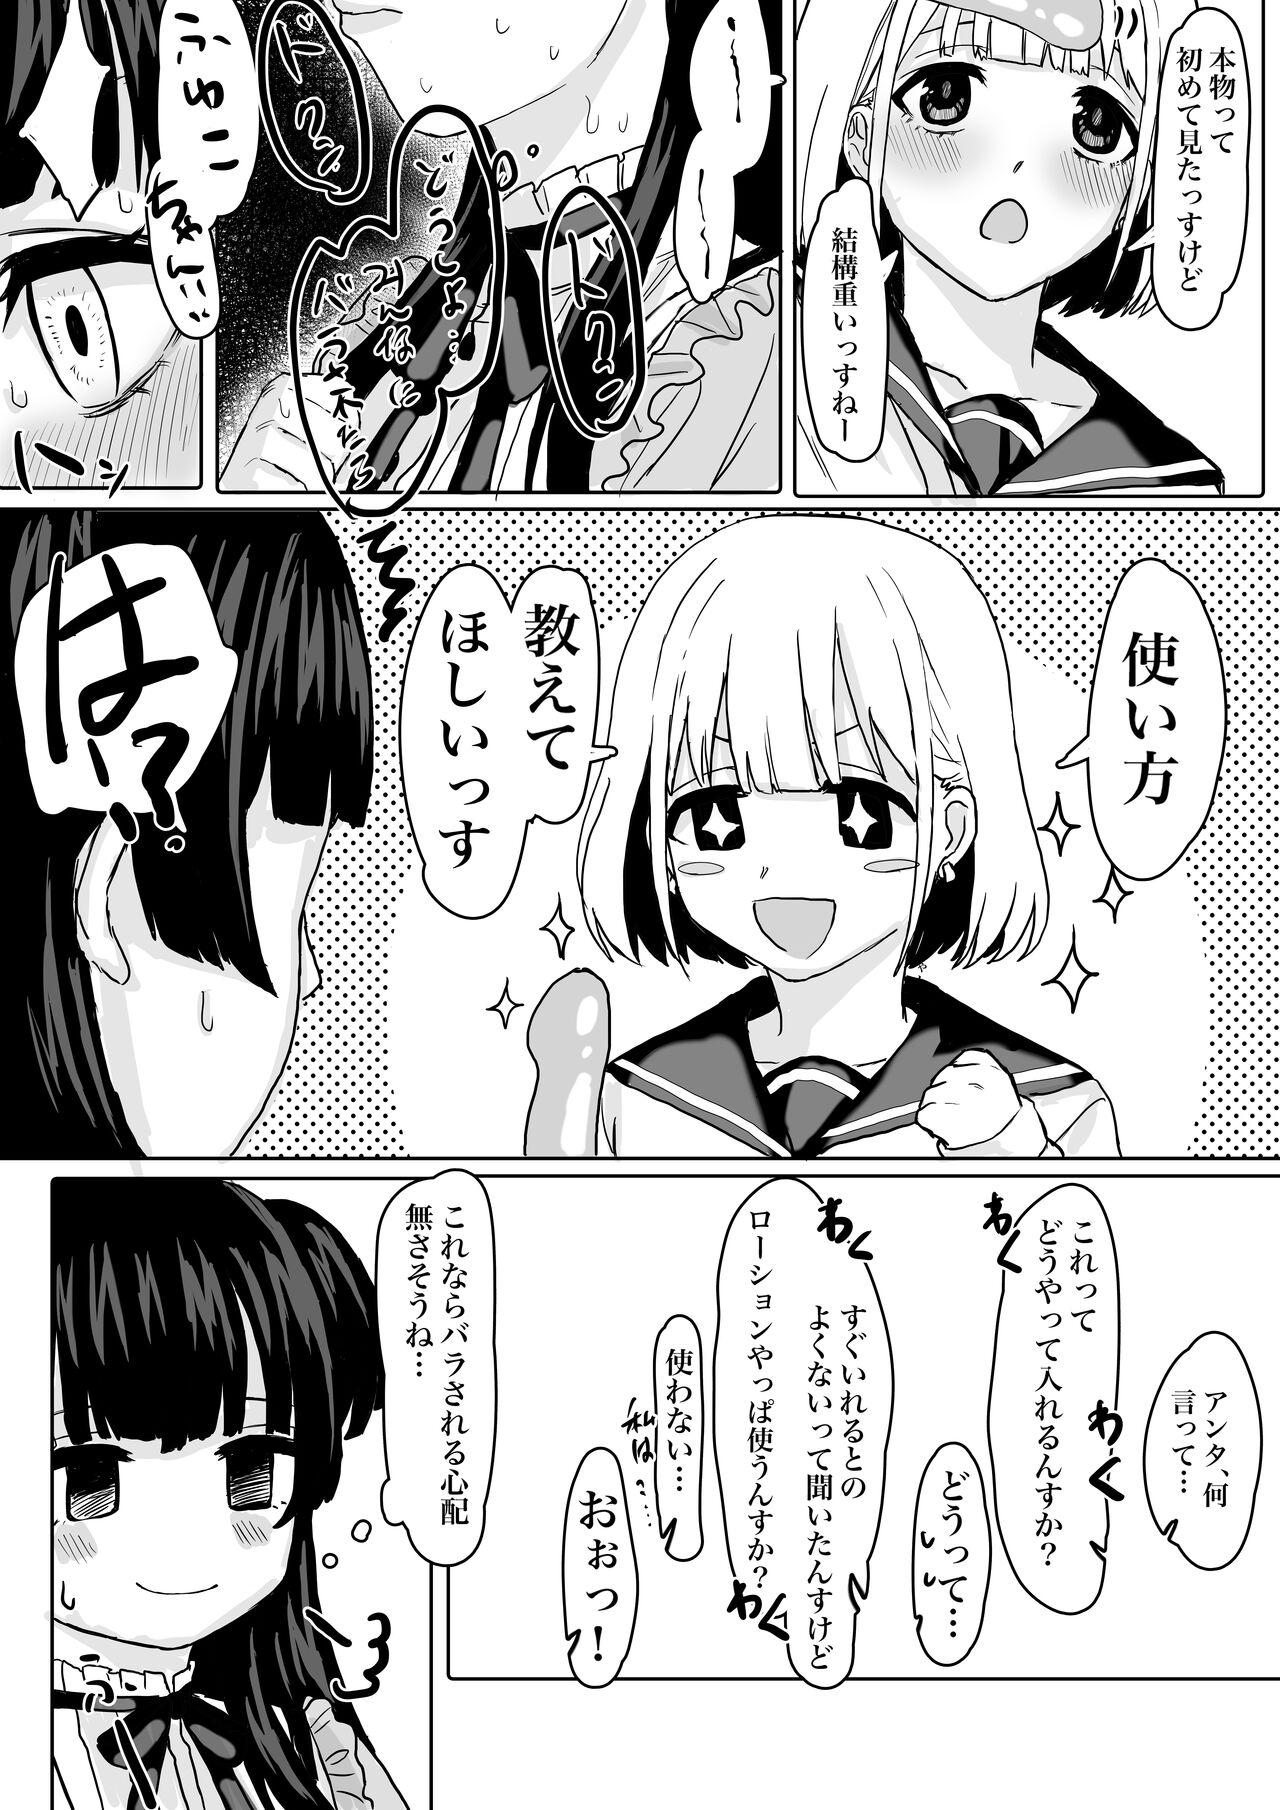 Softcore 「教えてほしいっす！」ふゆあさ百合 - The idolmaster Married - Page 4